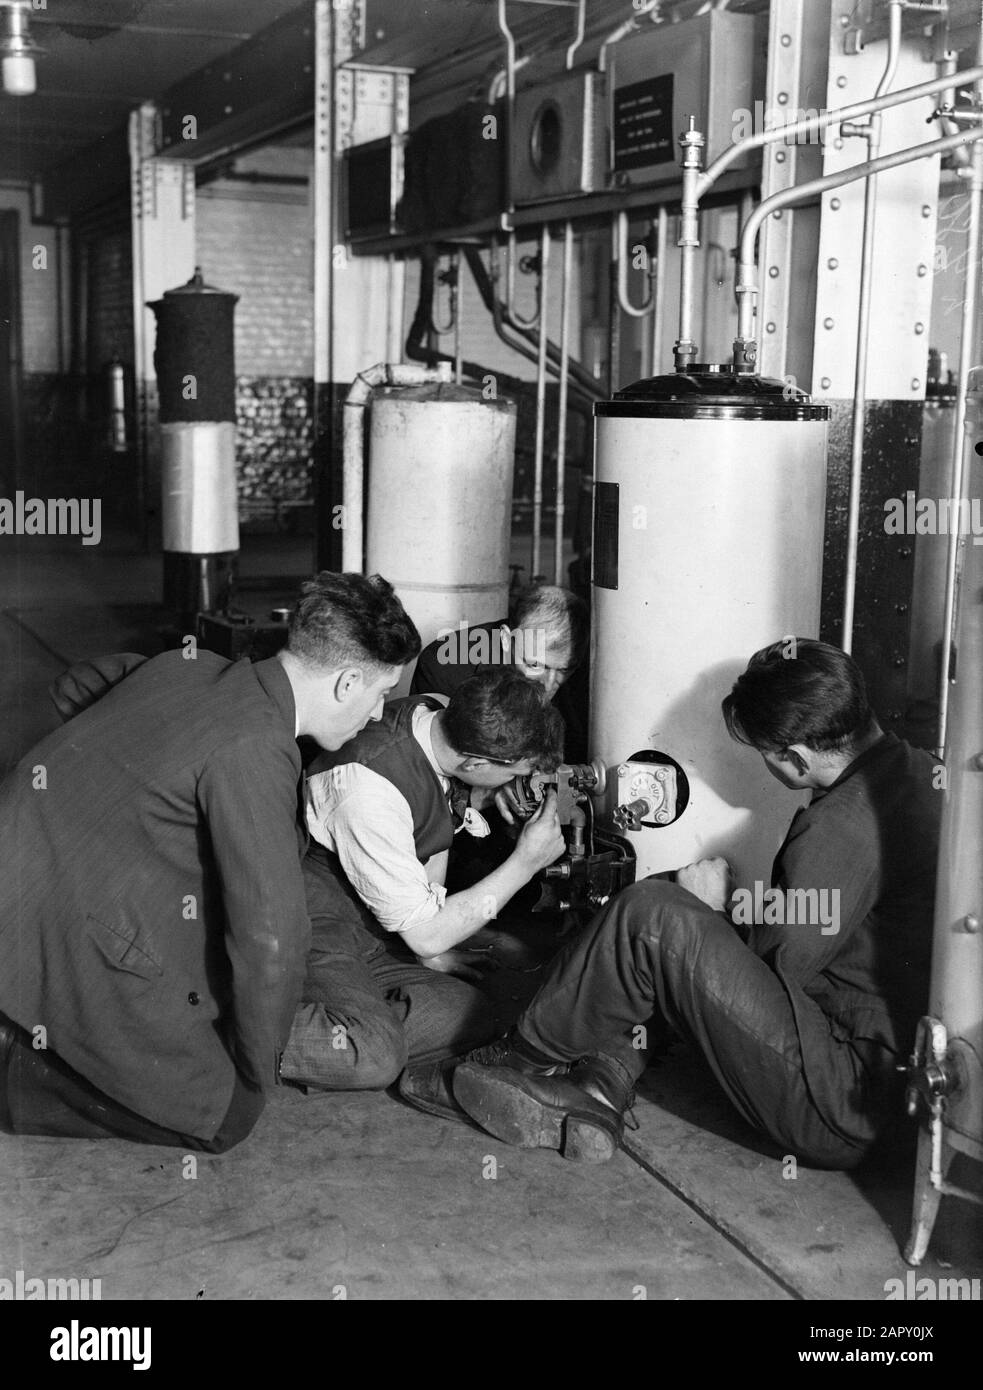 Reportage Watson House, London  Watson House: the factory of the Gas Light & Coke Company in London. Teaching at water heaters Date: 1933 Location: England, London Keywords: geysers, pupils, teachers, education, schools Stock Photo